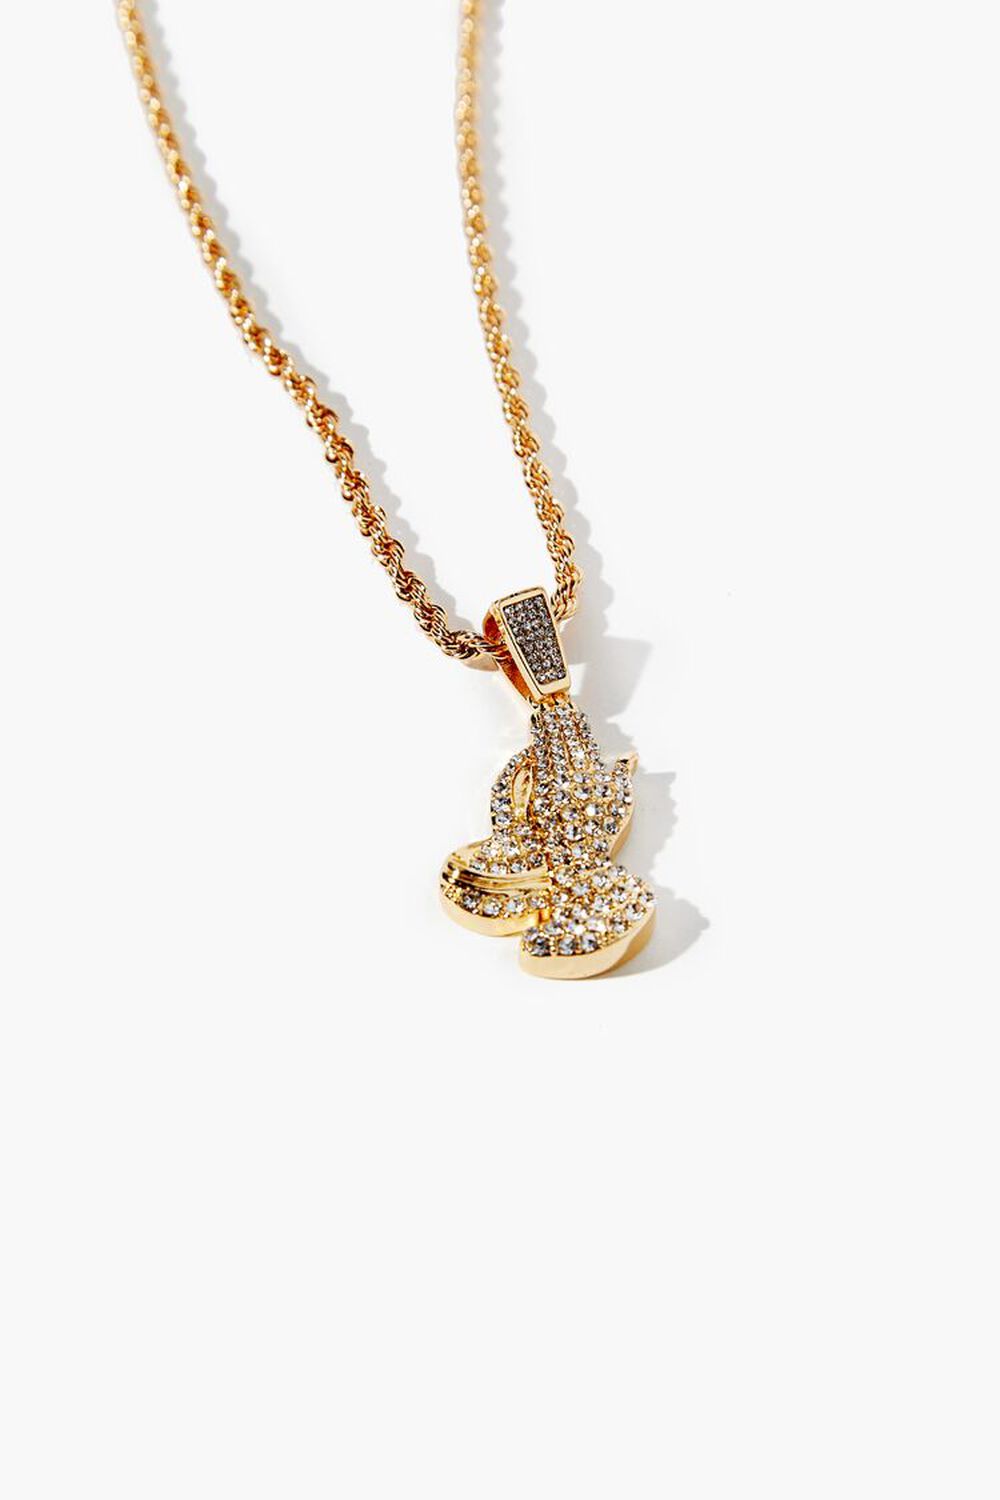 GOLD/CLEAR Men Praying Hands Necklace, image 1